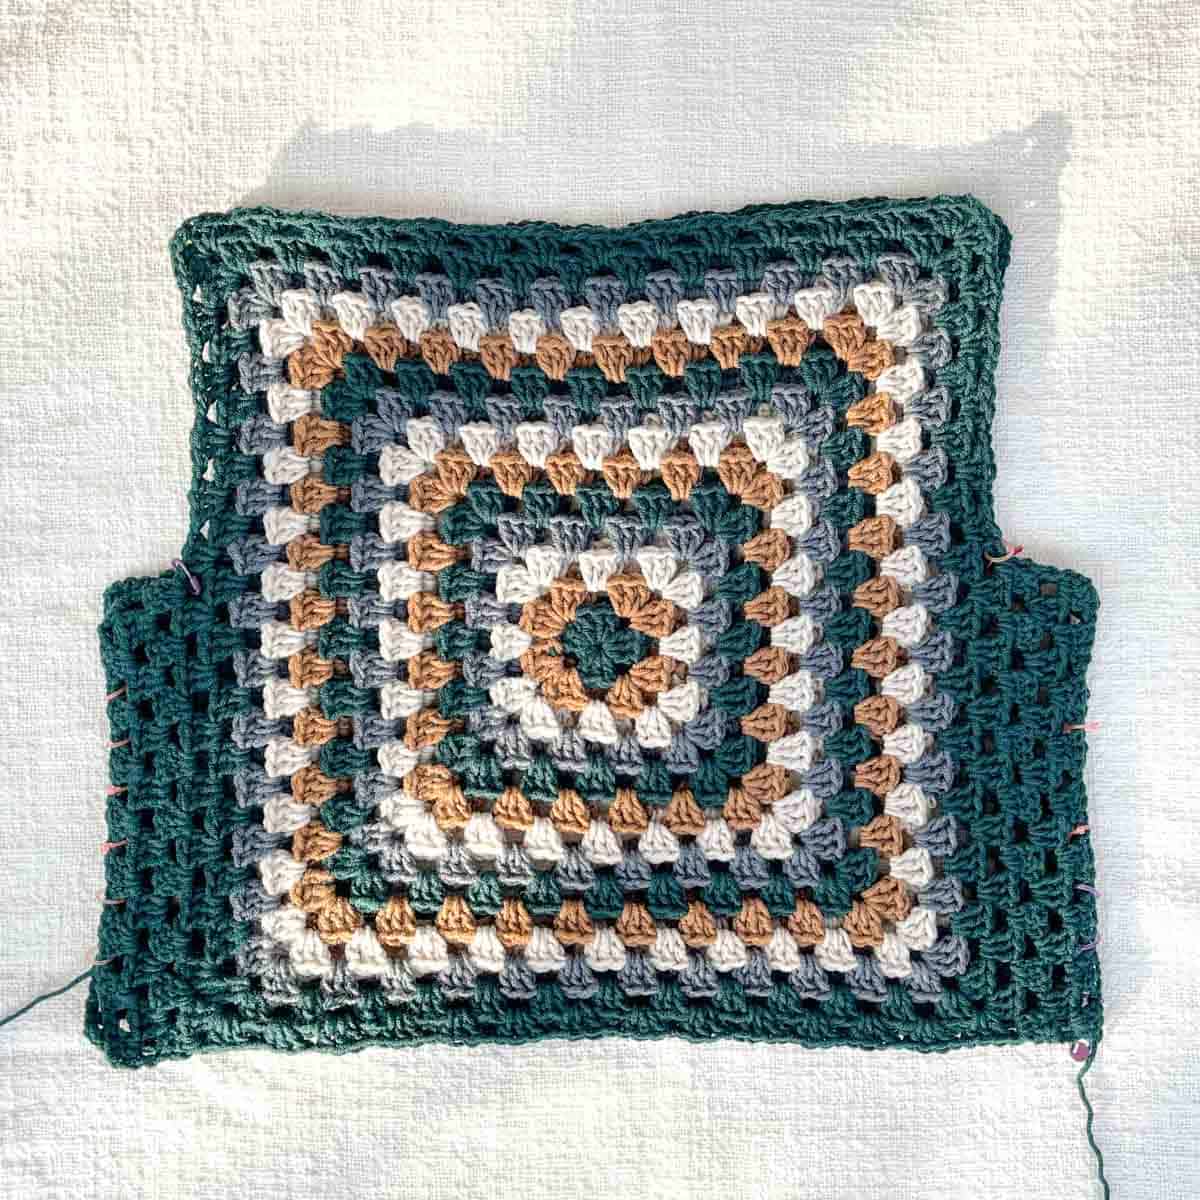 Crochet vest in progress, made from two granny squares.